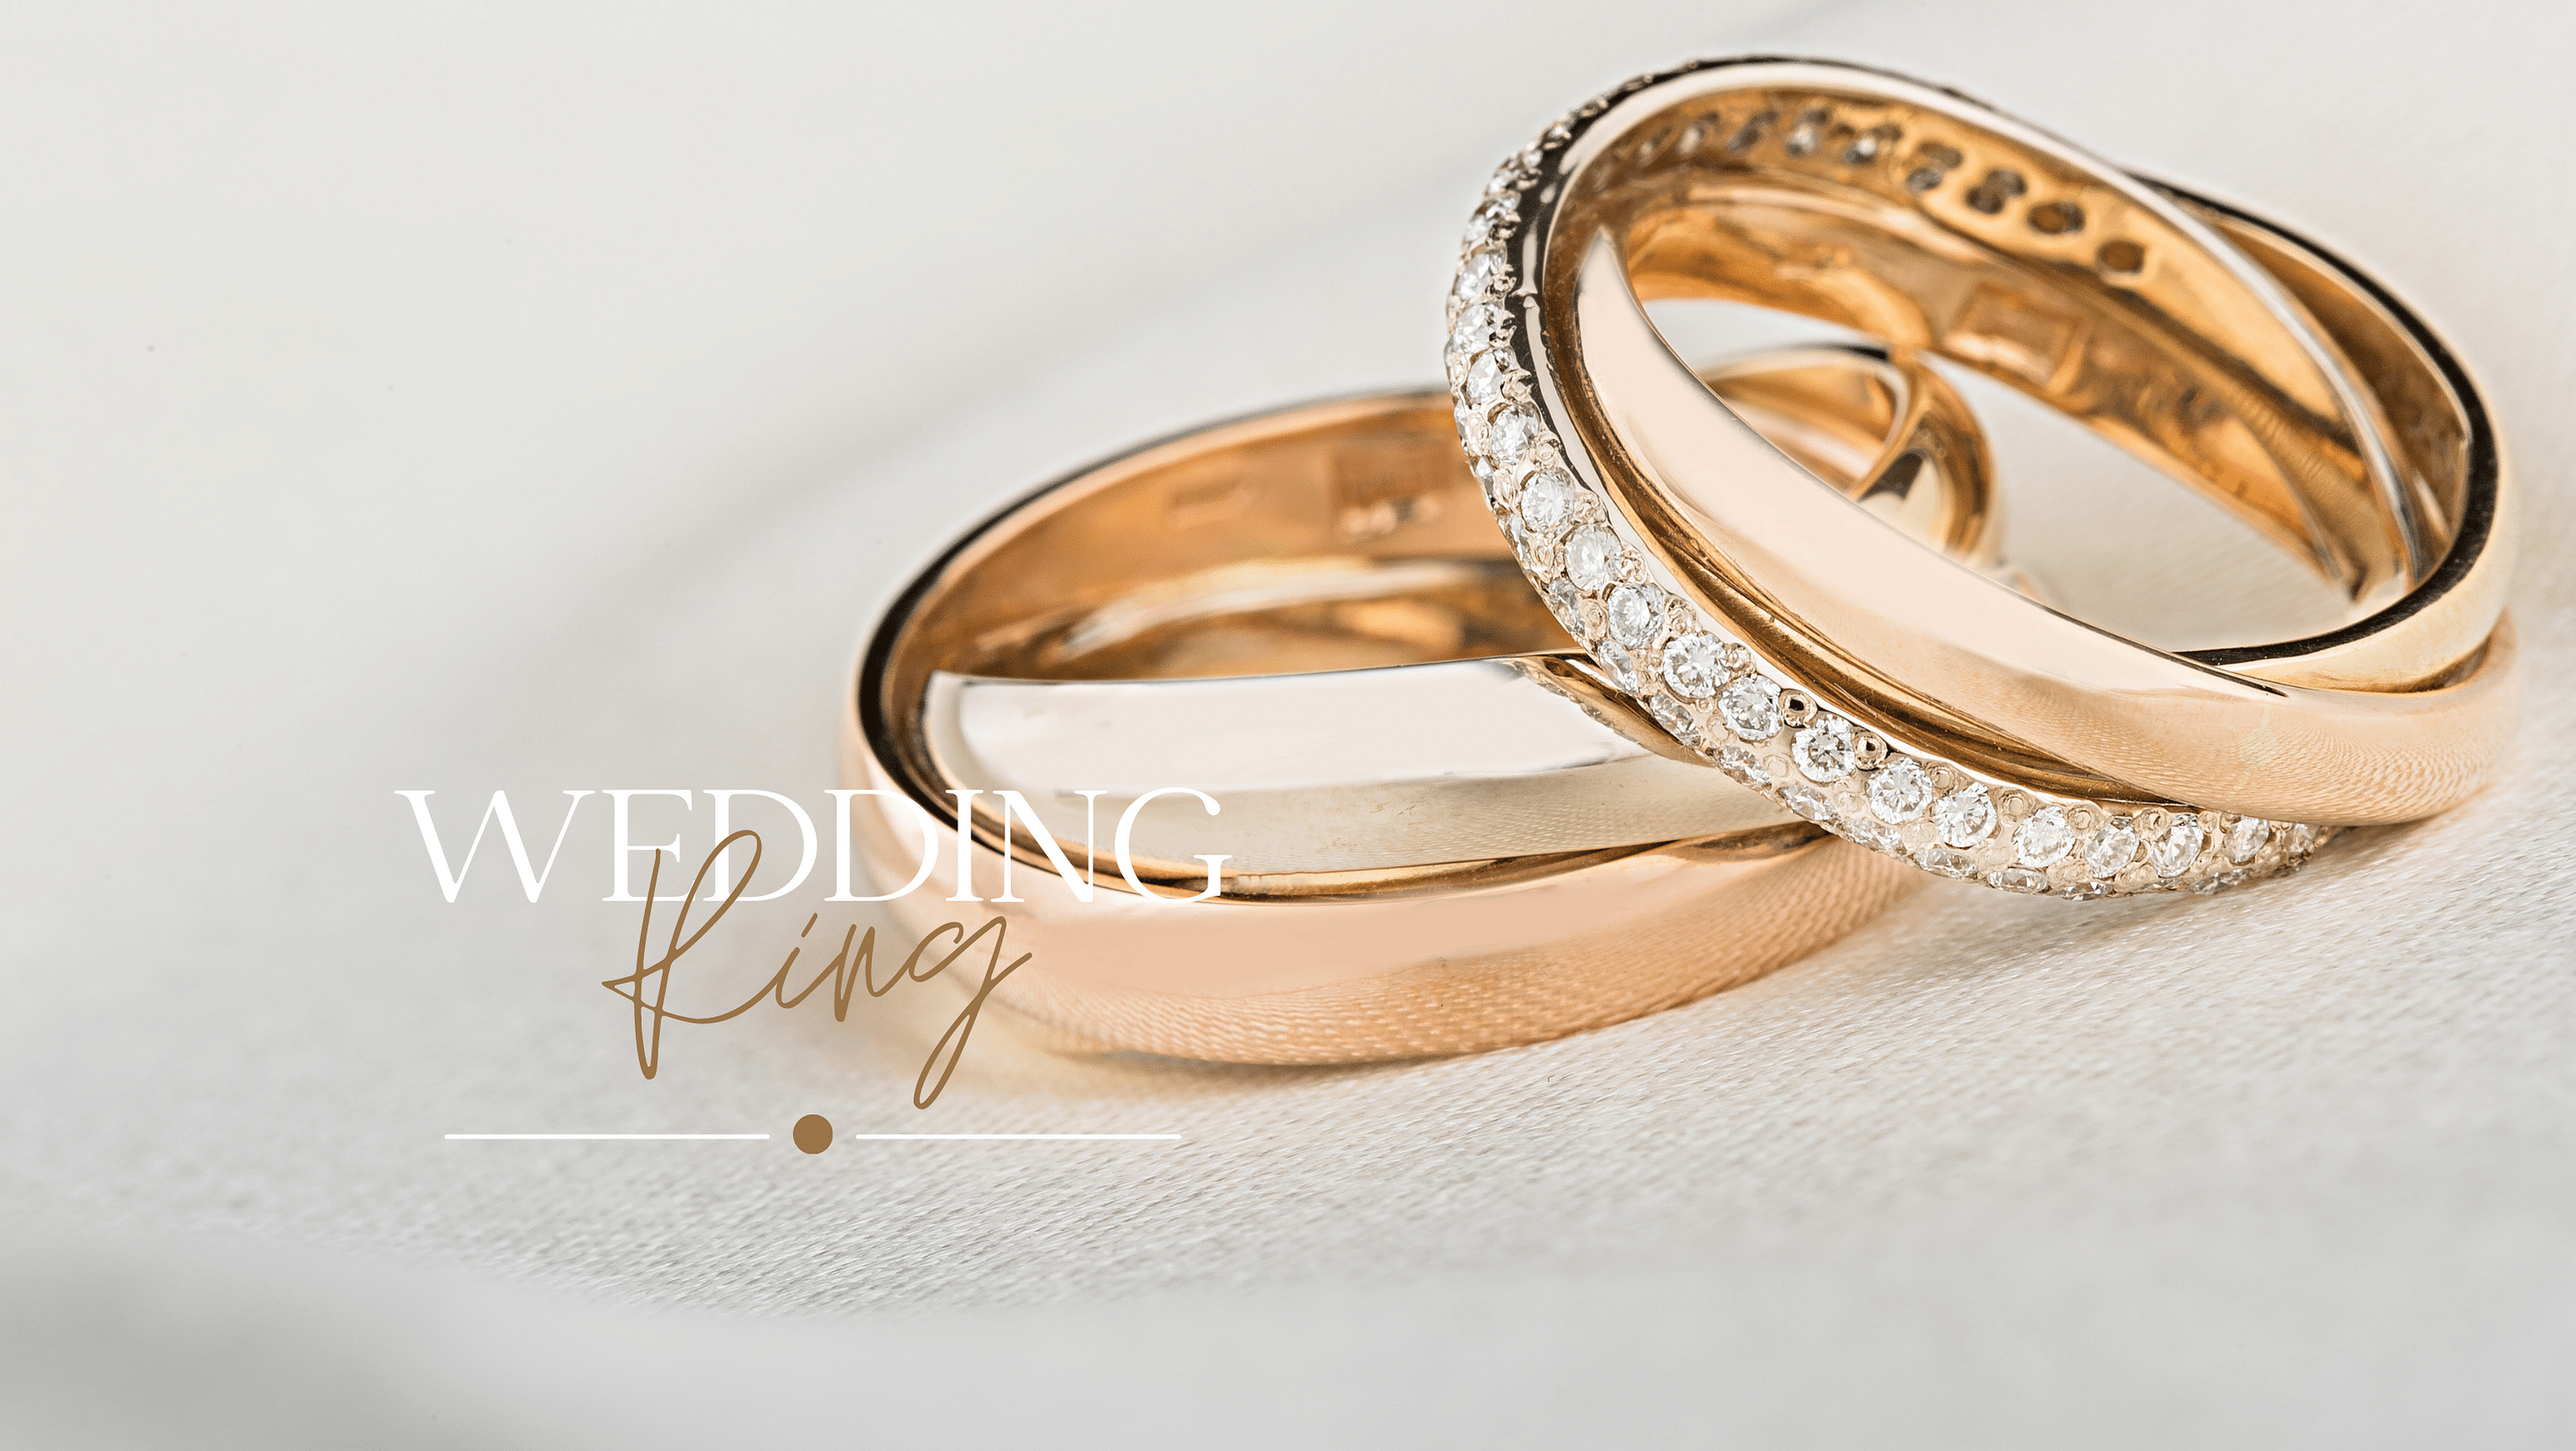 Why is the colour of my wedding ring changing? - Lebrusan Studio